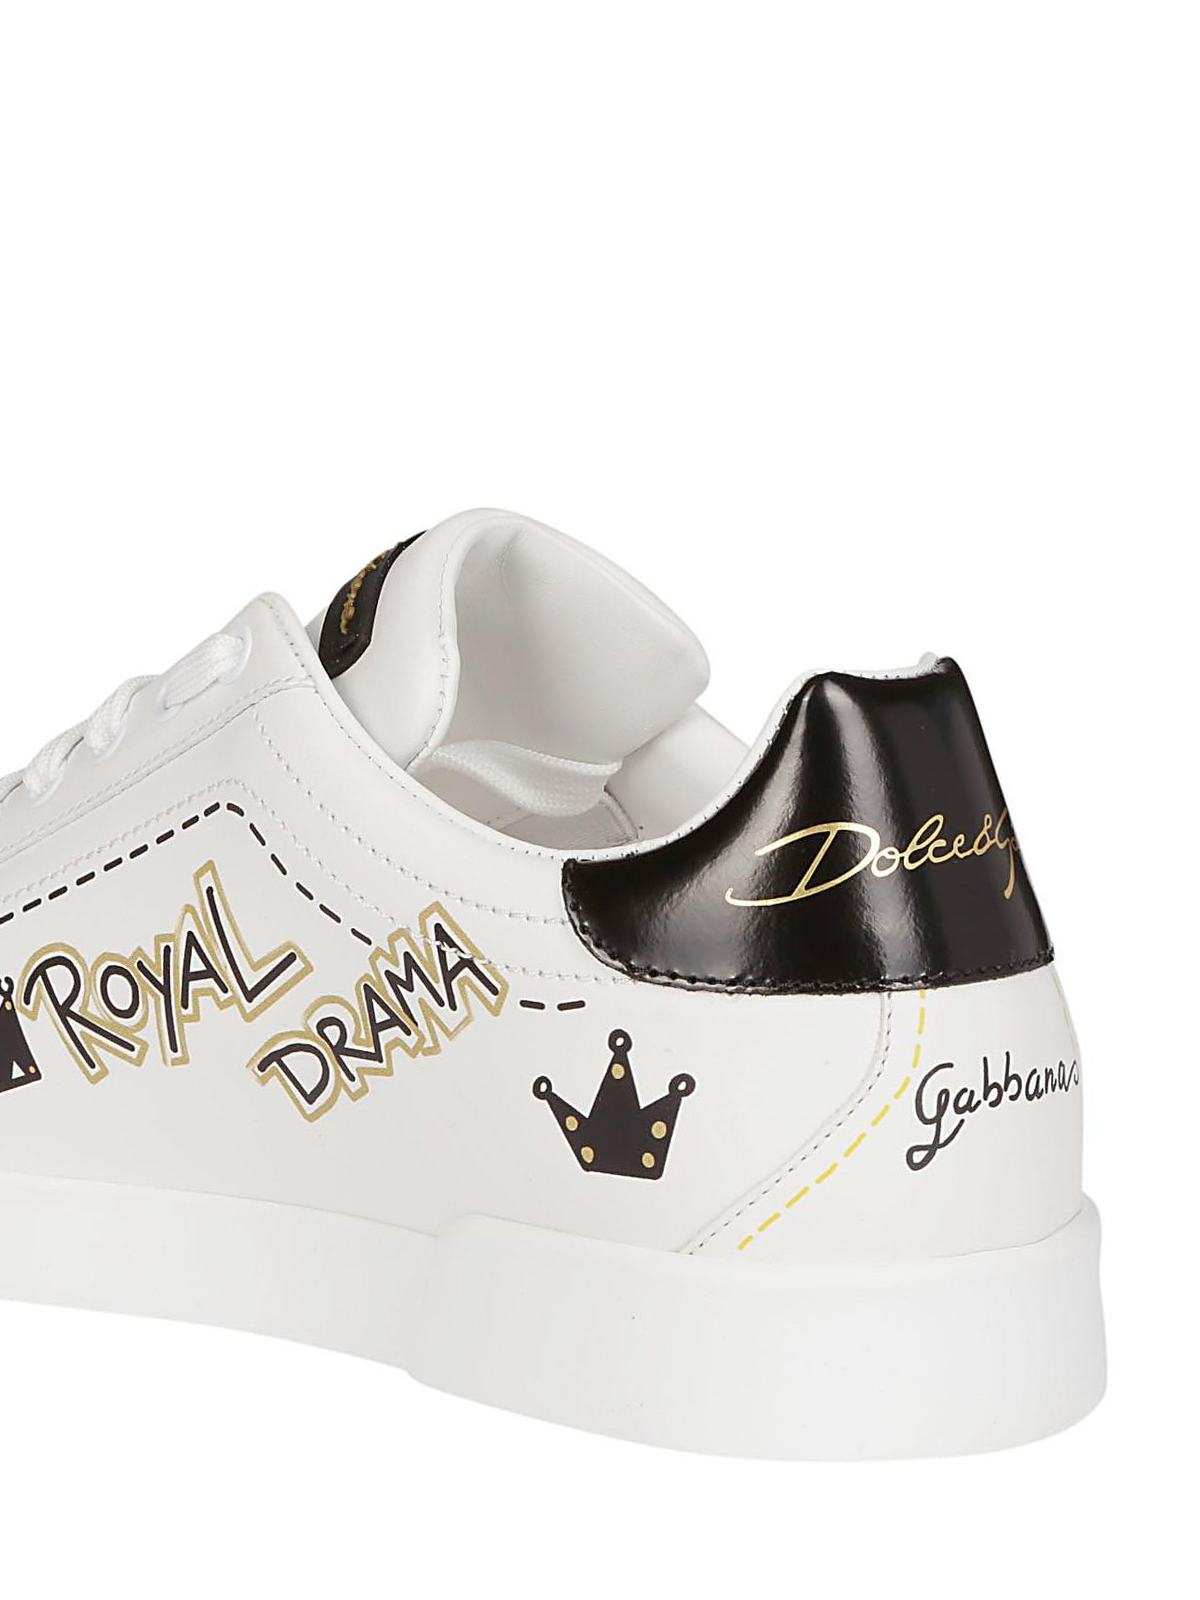 dolce and gabbana royal shoes